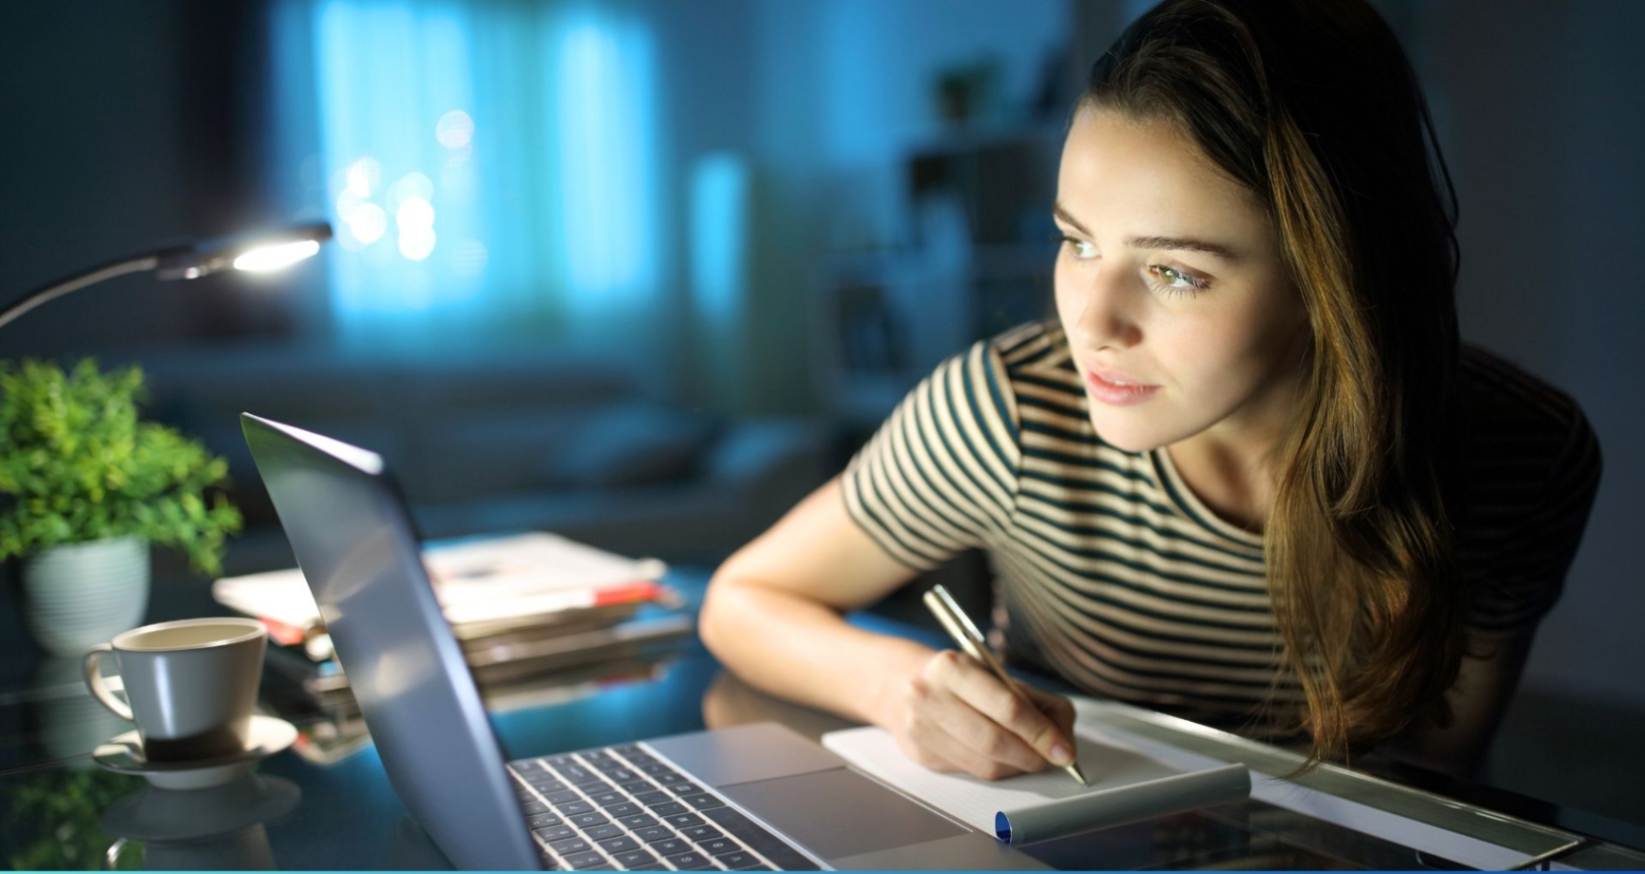 GIRL WRITING ON A NOTEBOOK LOOKING AT HER LAPTOP SITTING AT DESKDESK